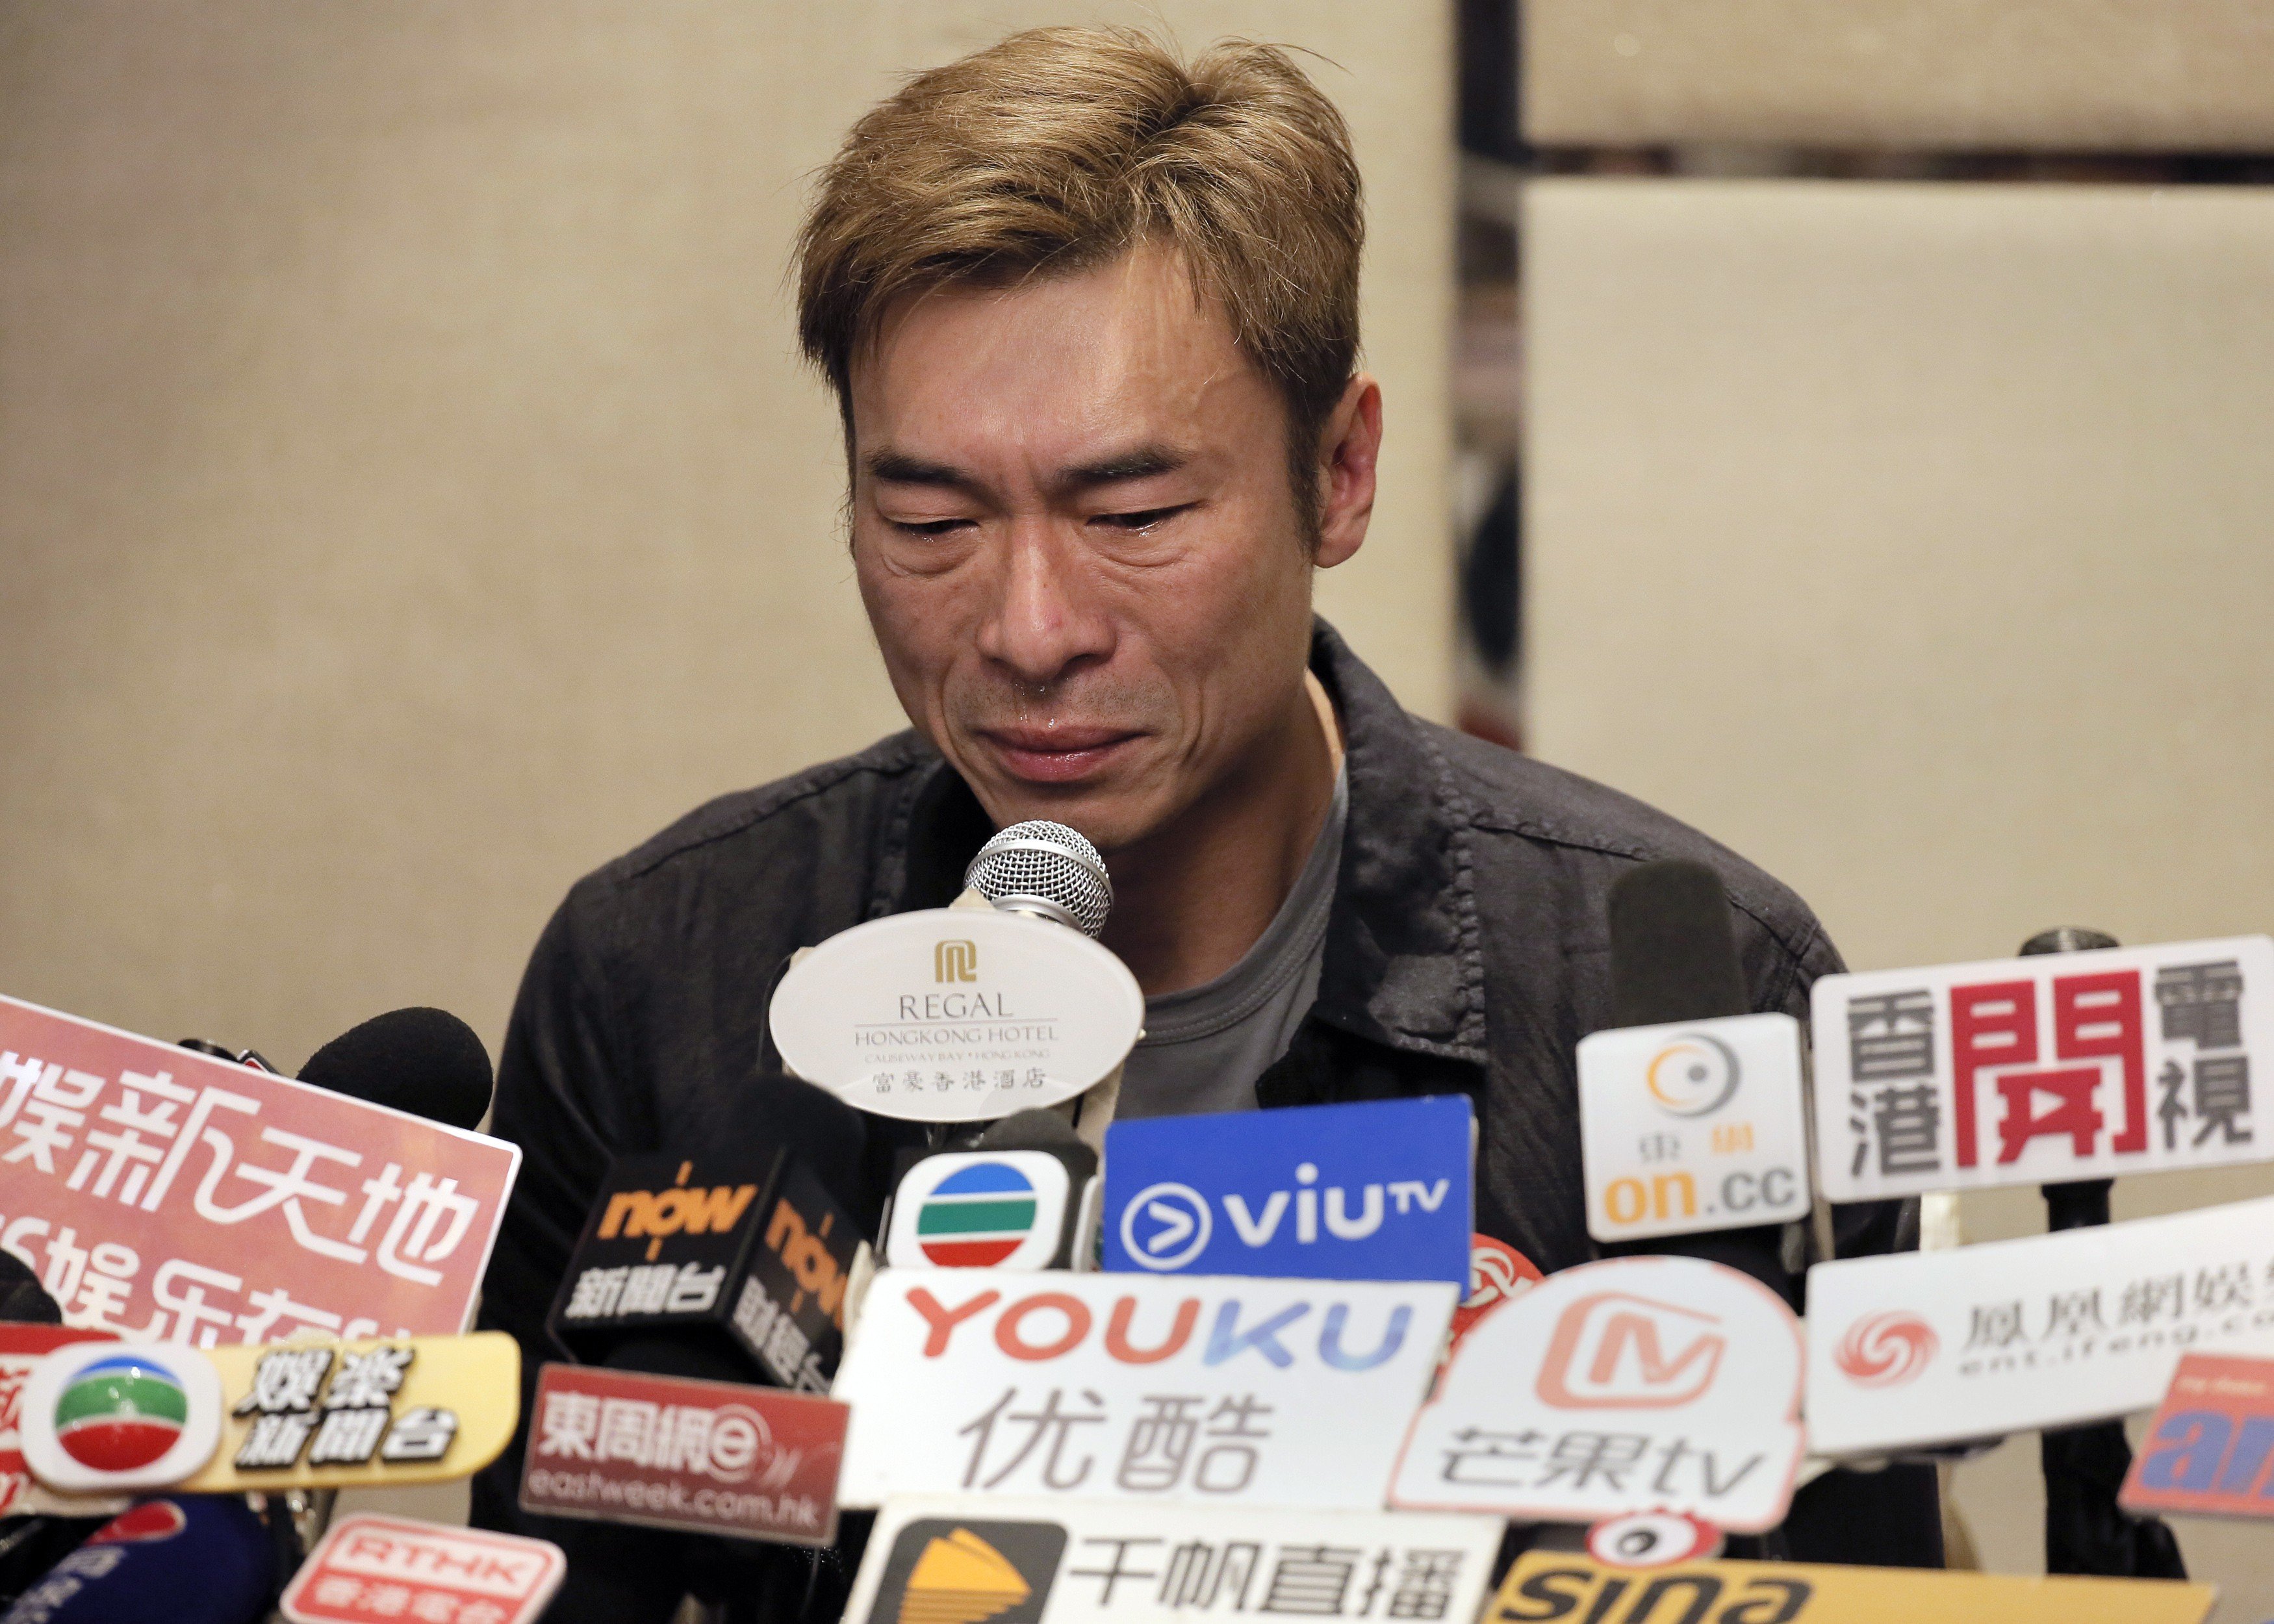 Andy Hui Kissing Scandal: Why Taking Cheap Shots Can Be A Cruel Thing To Do  | South China Morning Post